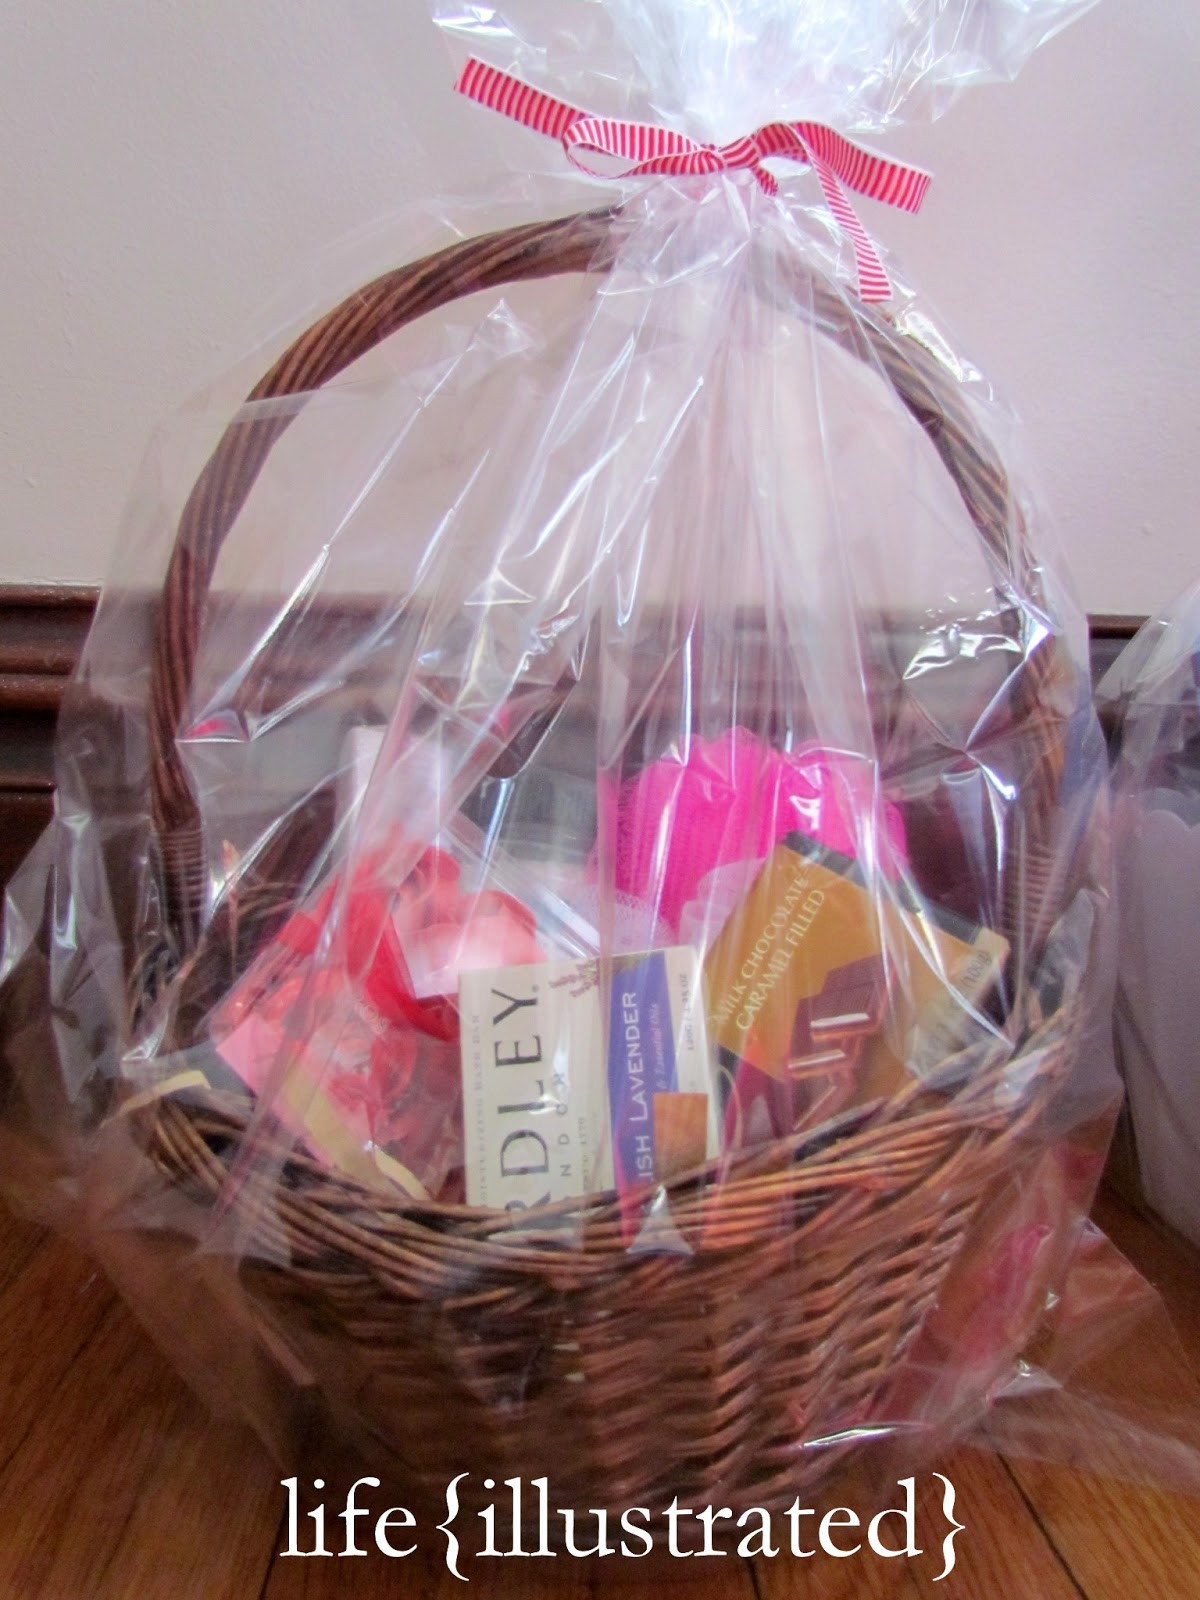 Valentines Gift Baskets Ideas
 life illustrated Valentine Gift Basket Ideas